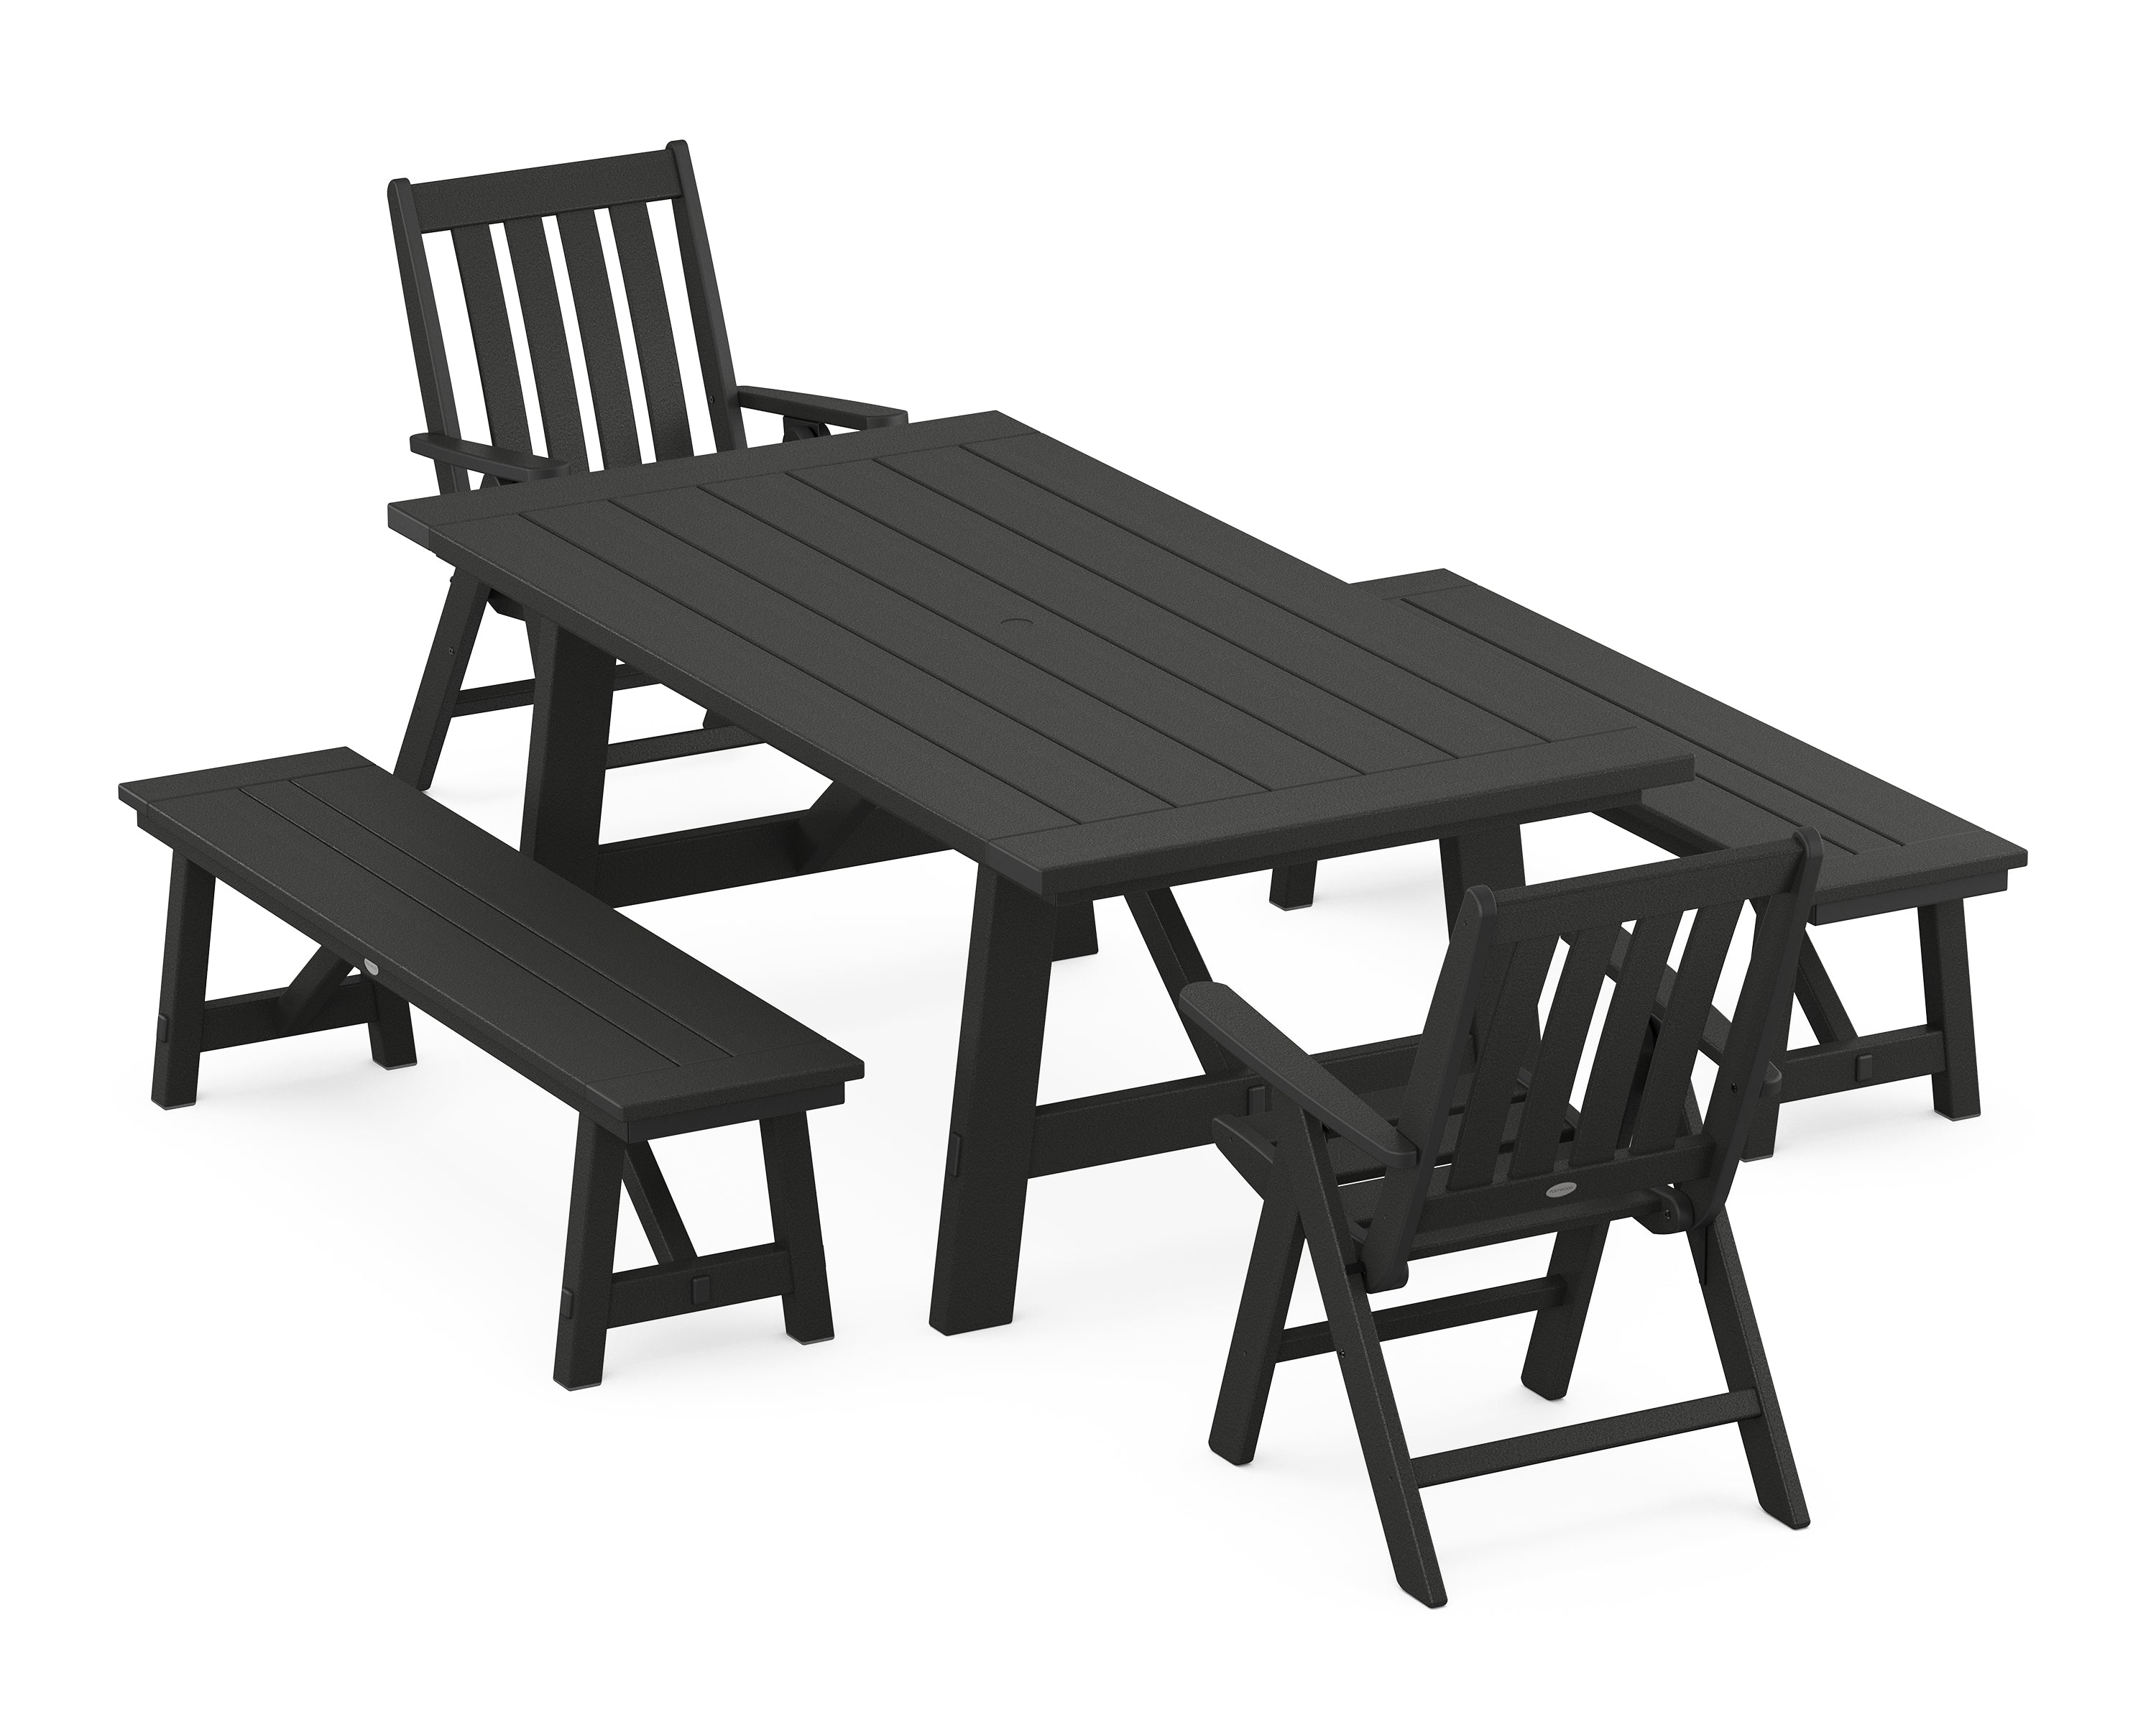 POLYWOOD® Vineyard Folding Chair 5-Piece Rustic Farmhouse Dining Set With Benches in Black